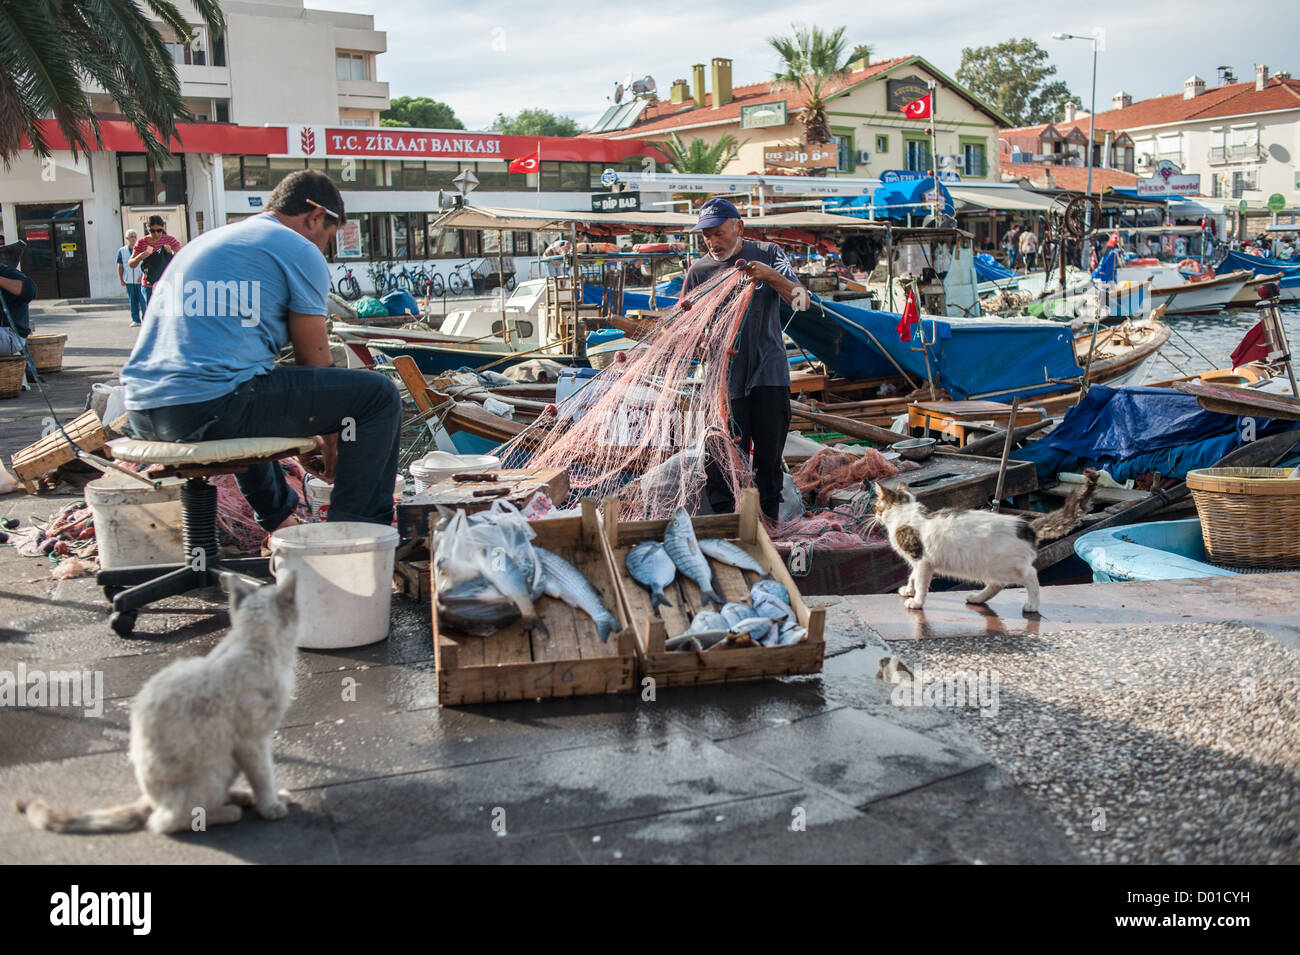 Cats observing fish on the quayside in Foca, Turkey, with fishermen in the background preparing their fishing nets. Stock Photo